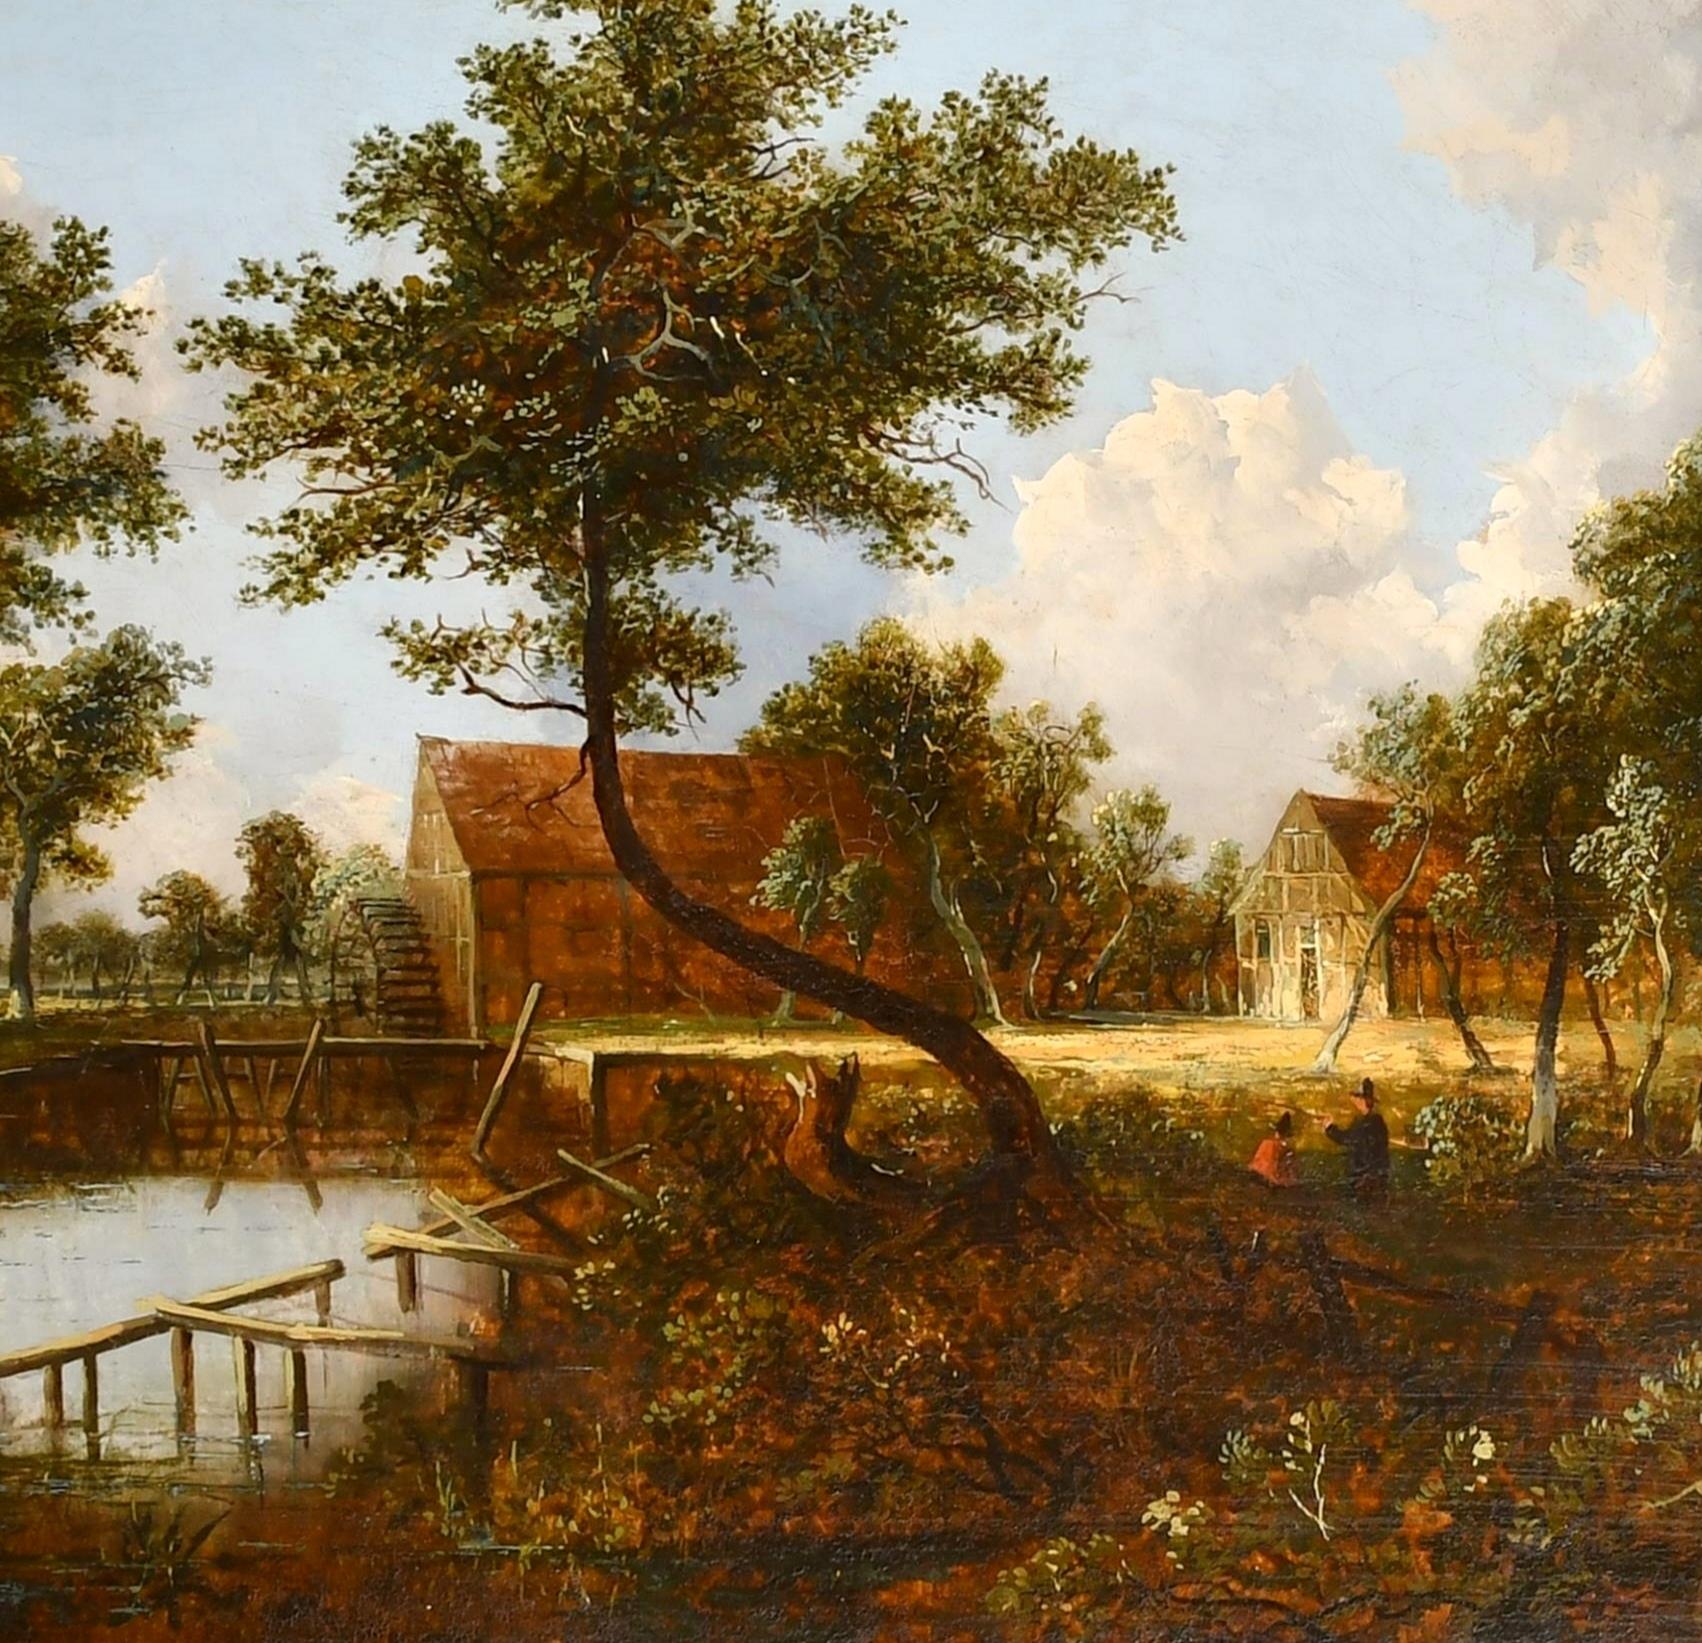 Figures in a Dutch Landscape - Large Antique 19th Century Oil on Canvas Painting For Sale 1